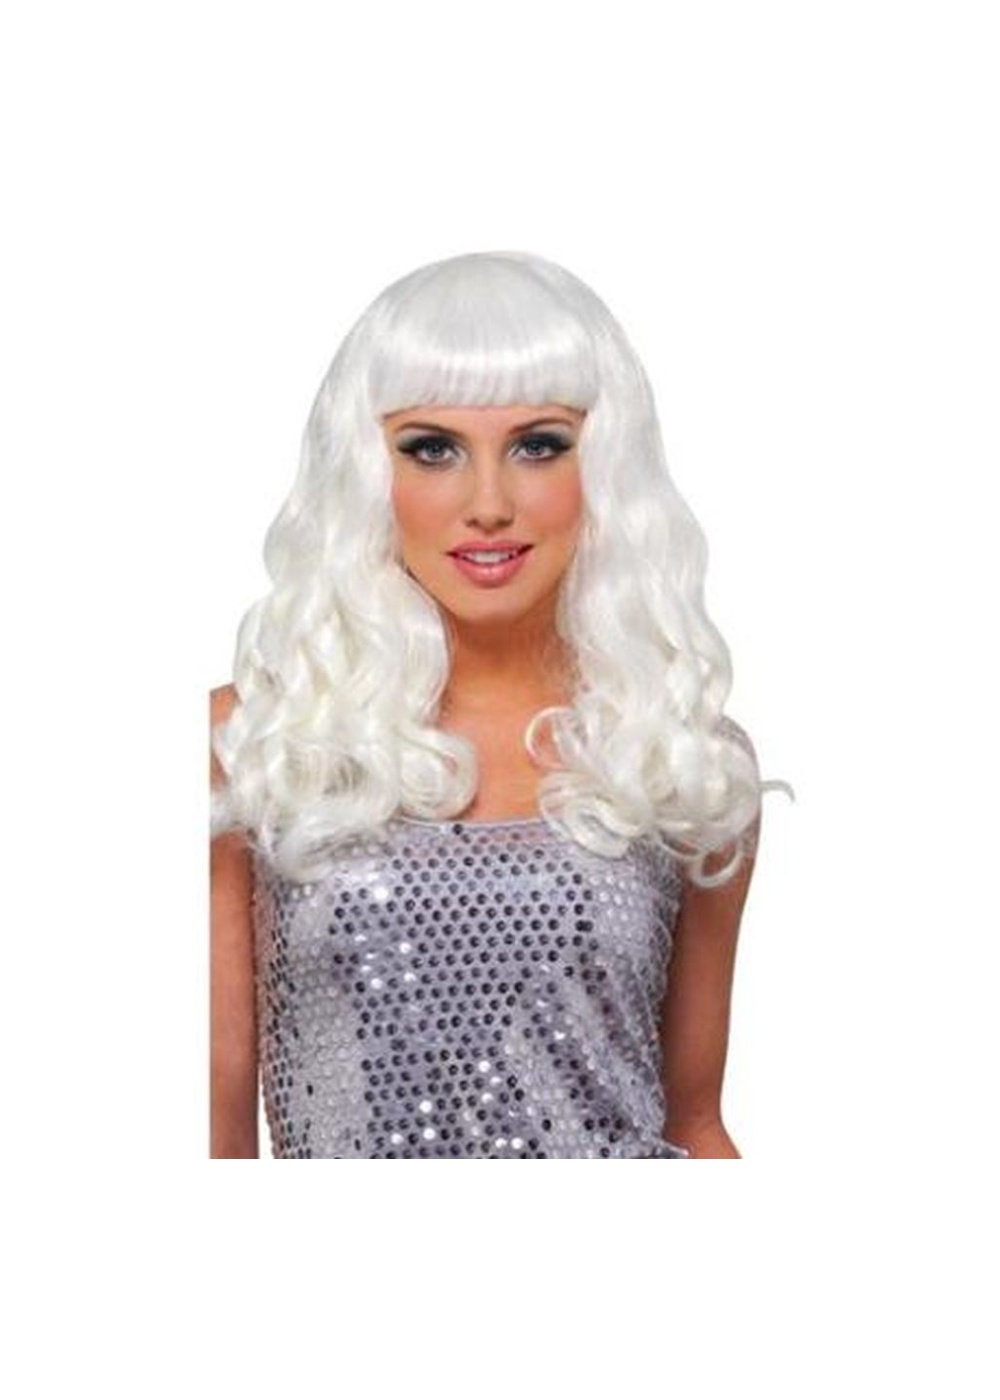  Girls Party White Wig